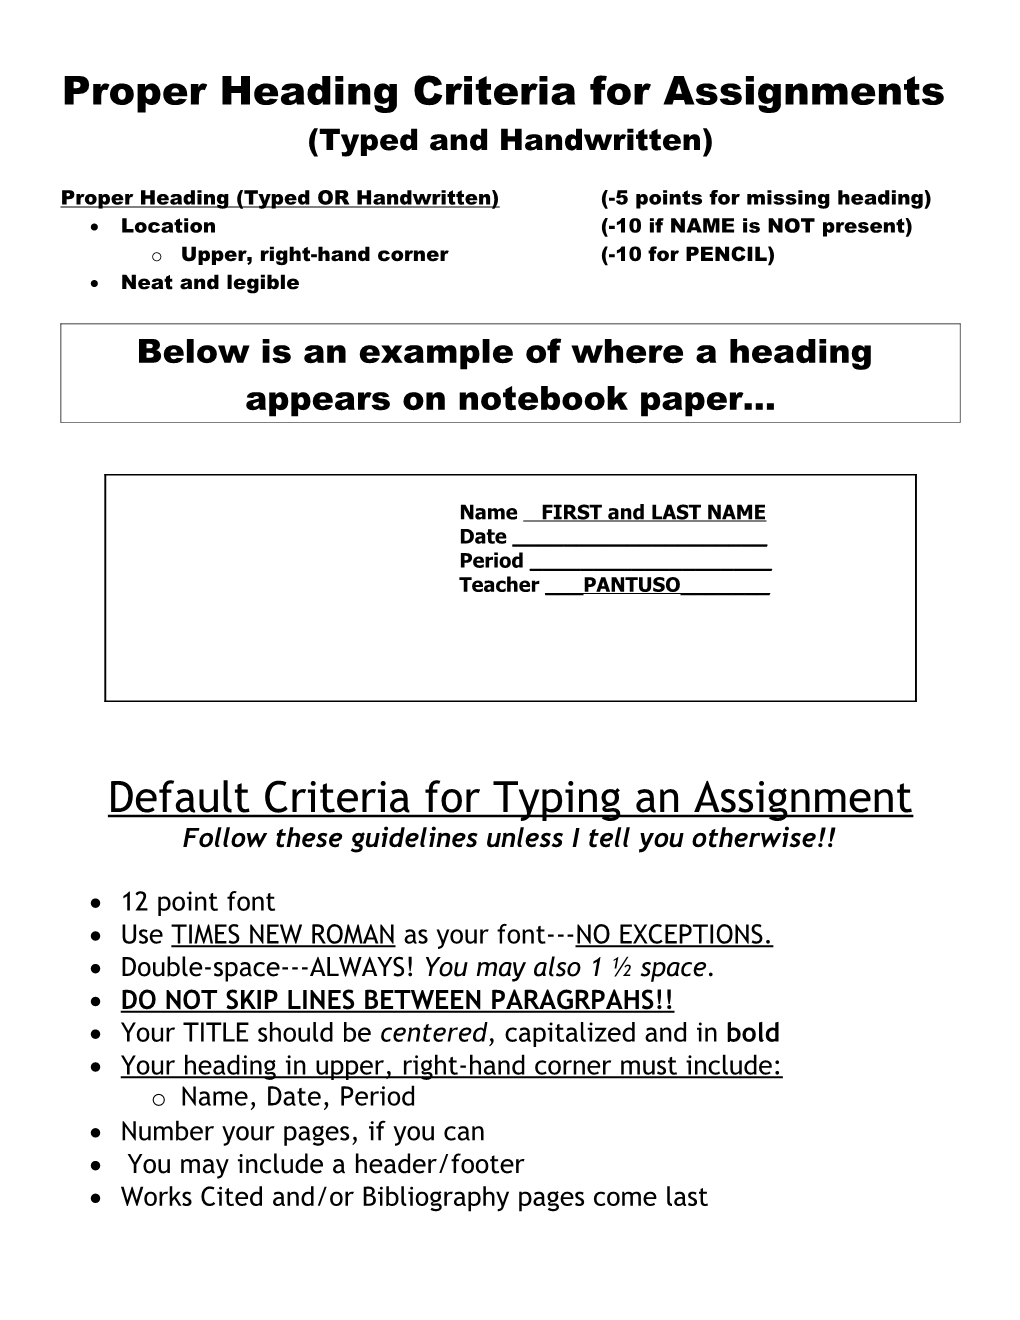 Proper Heading Criteria for Assignments (Typed and Handwritten)